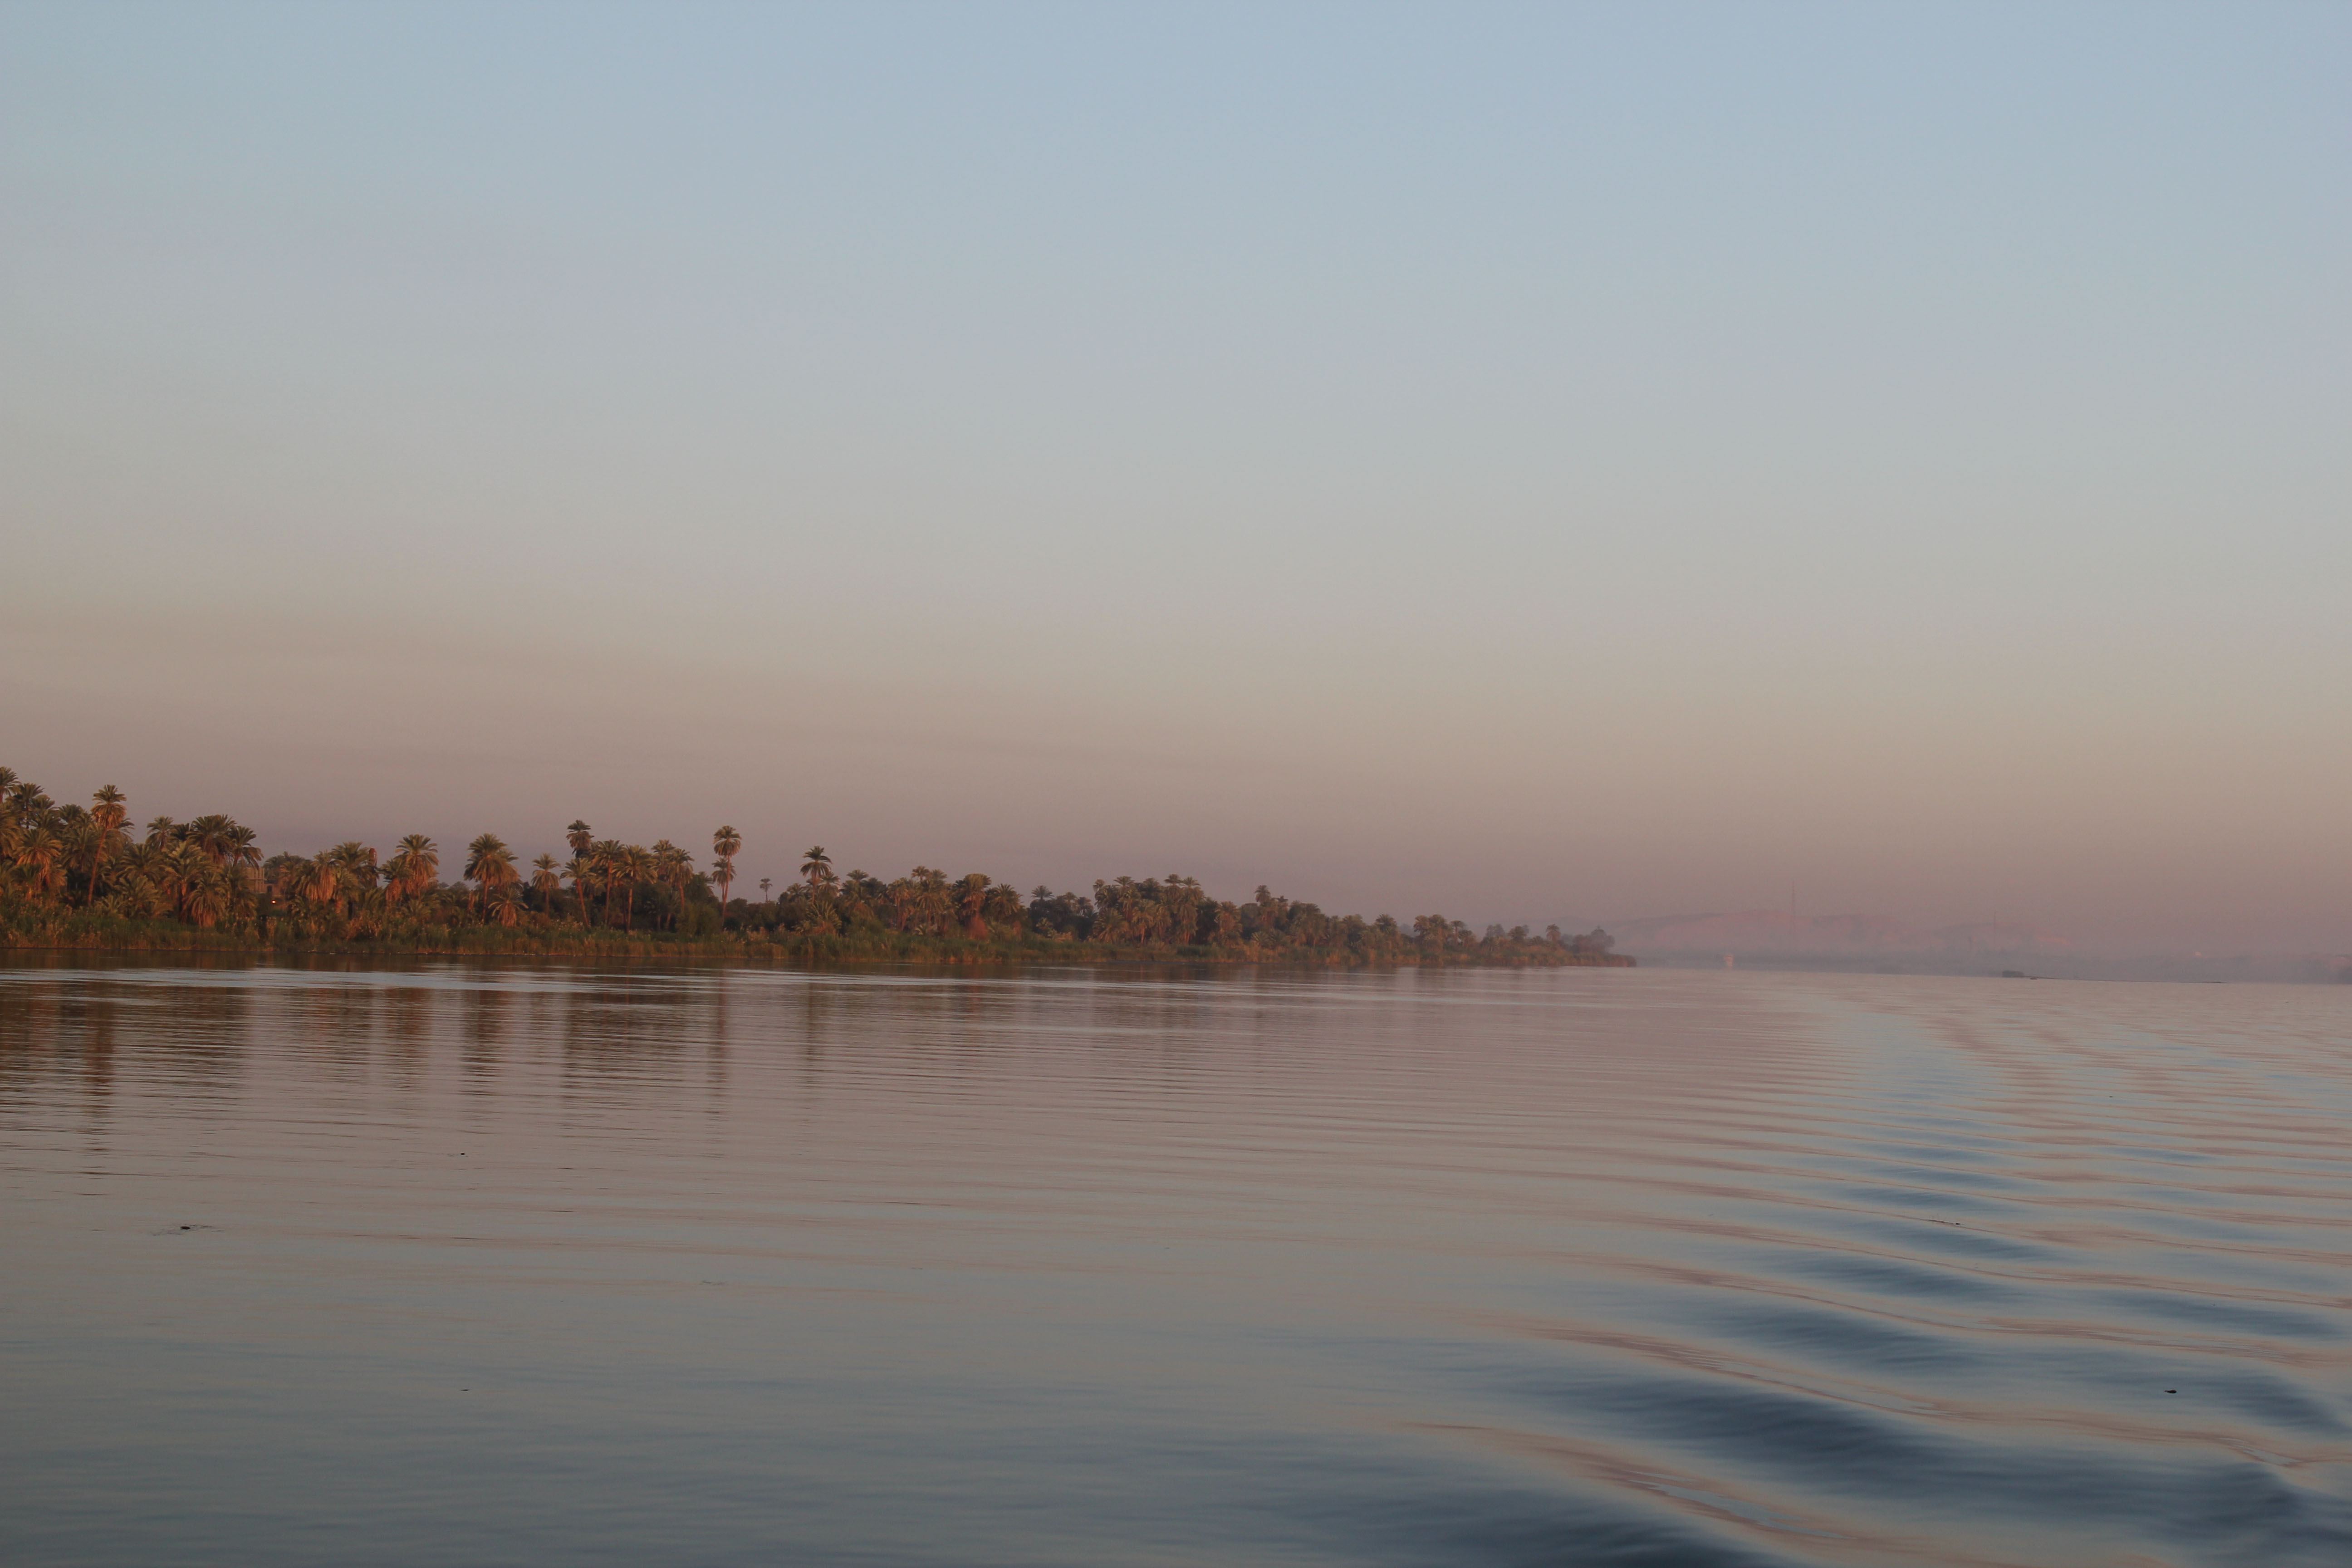 Early morning on the Nile